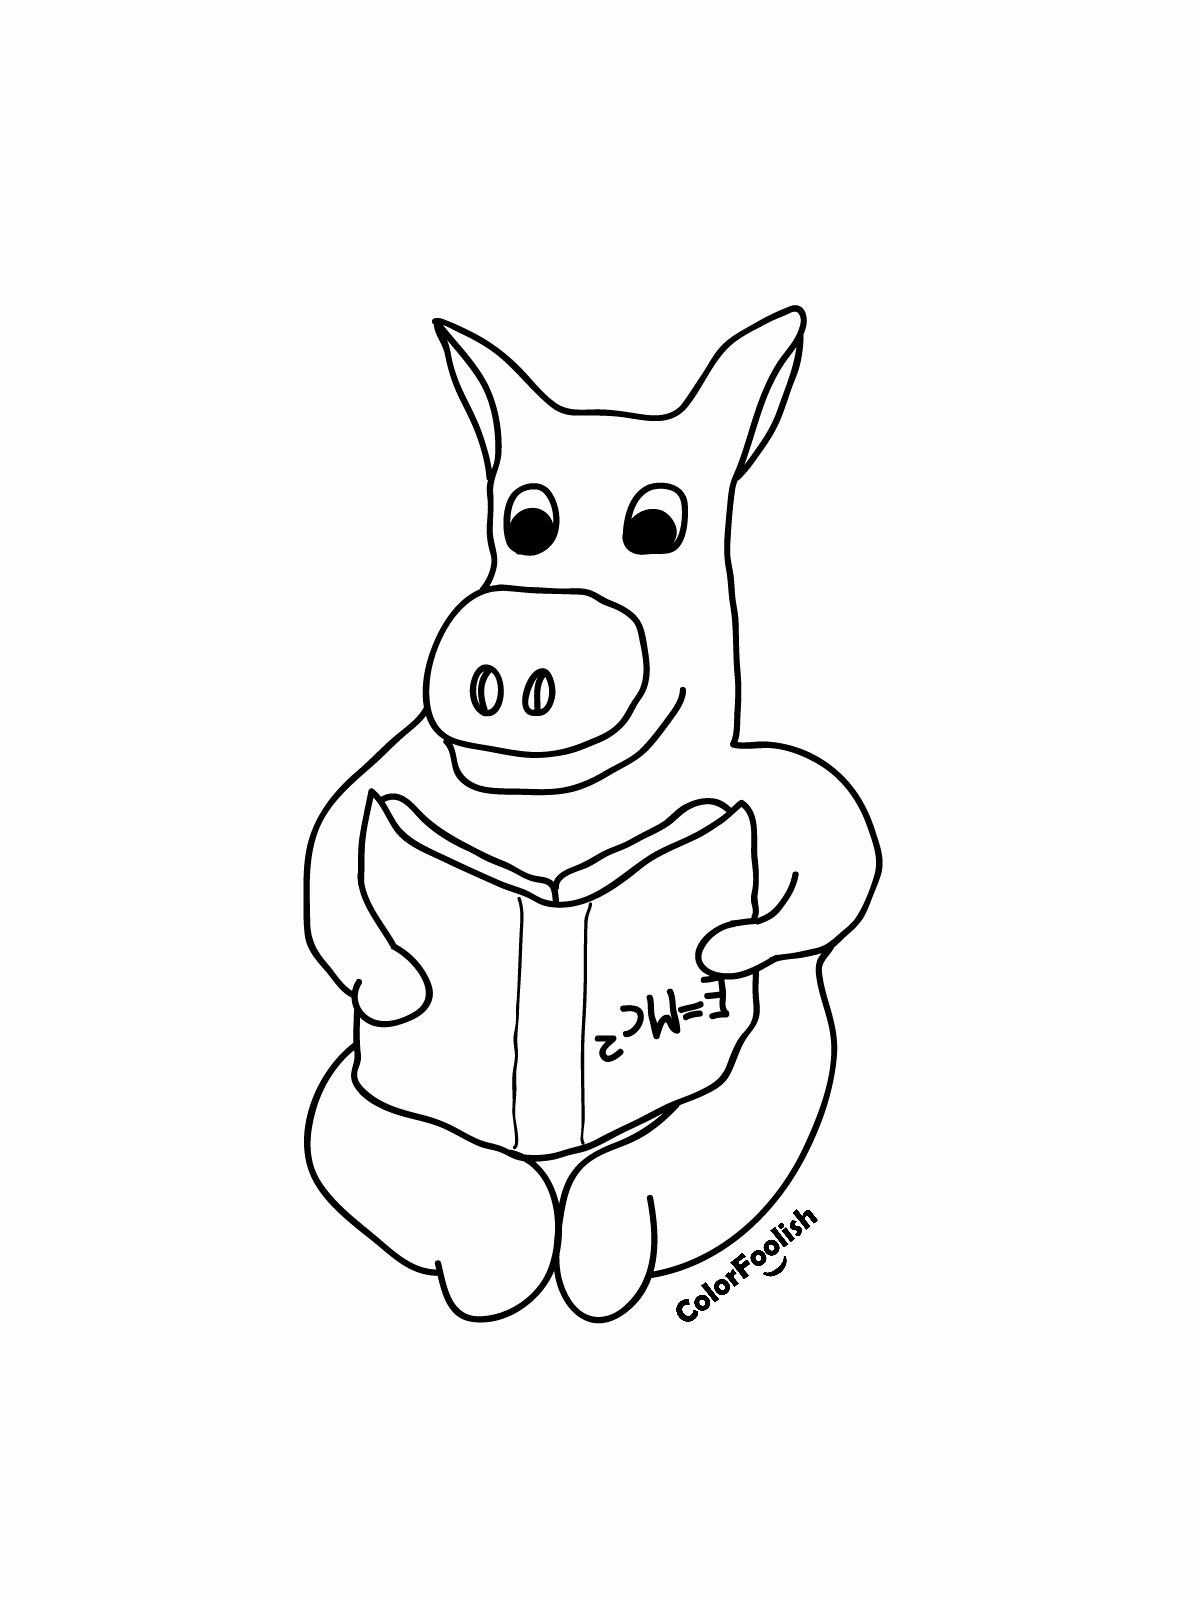 Coloring page of a smart donkey